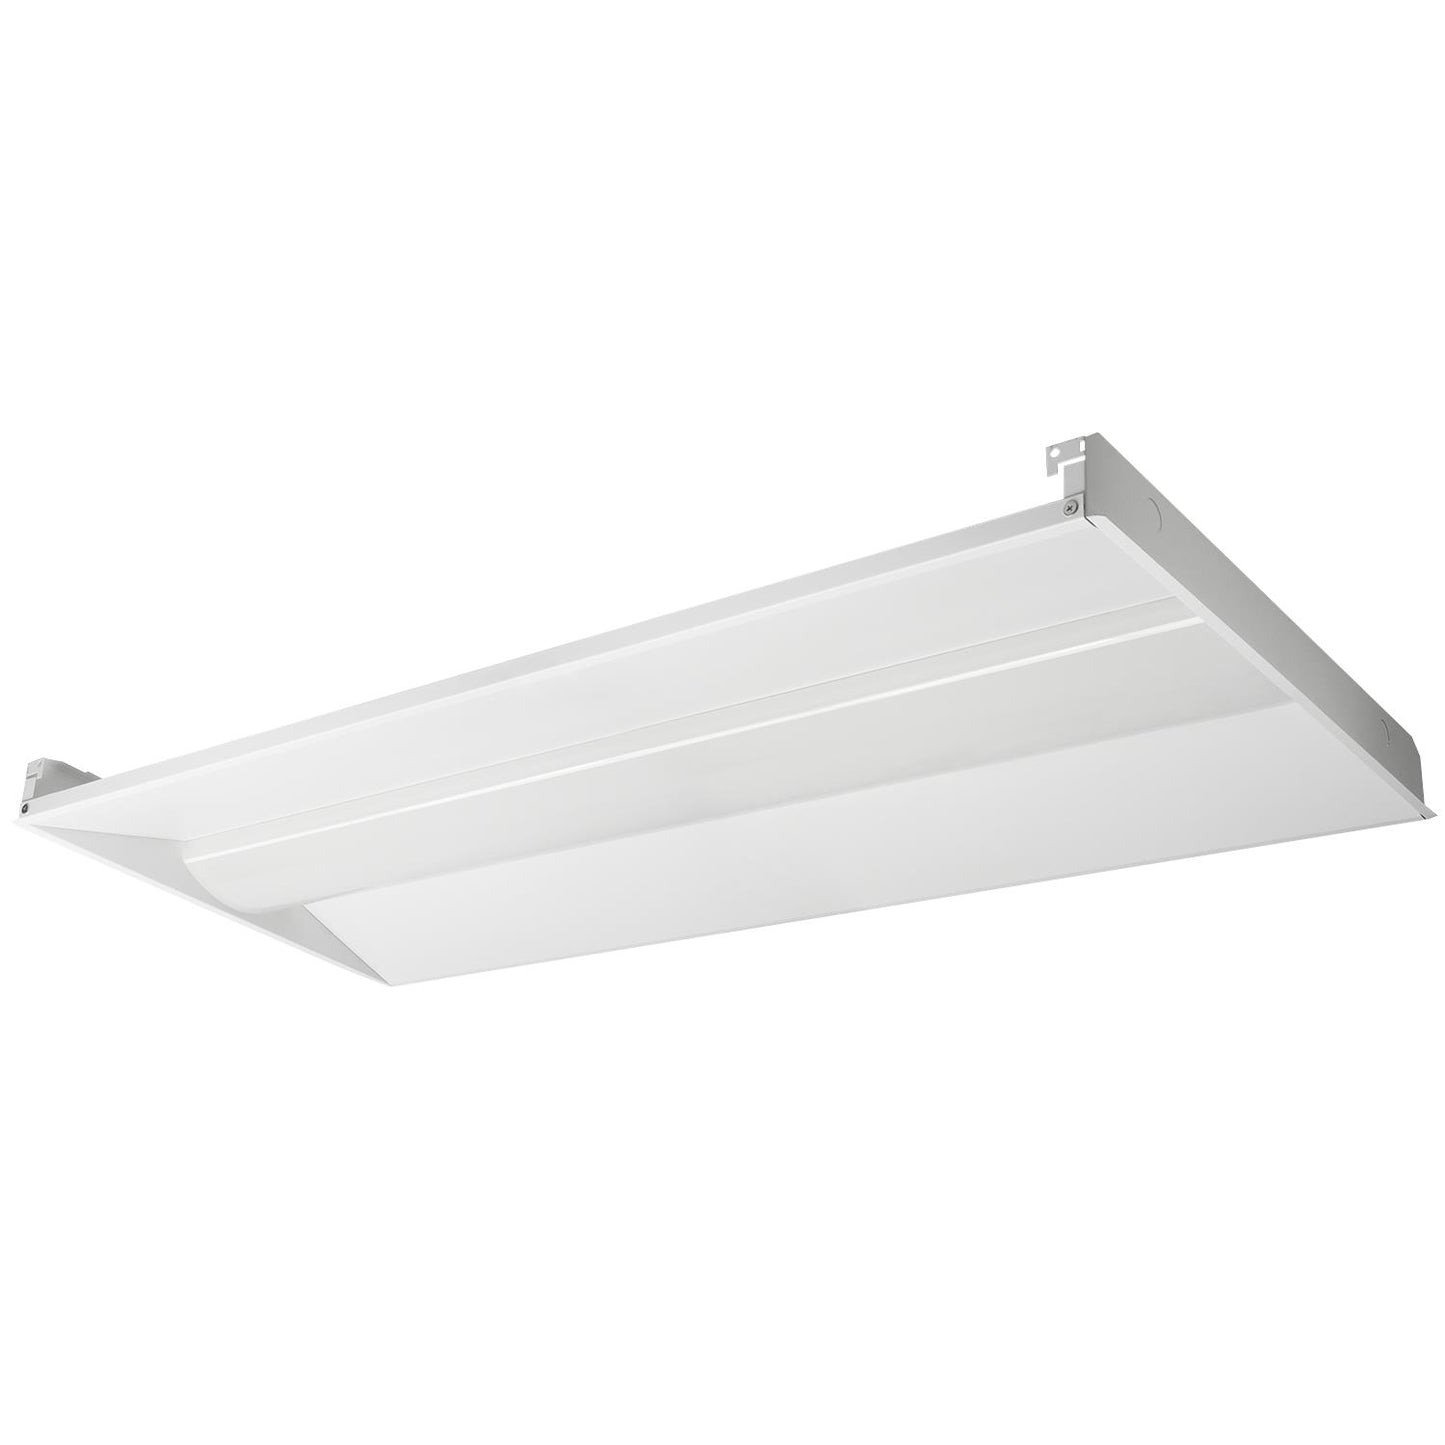 Sunlite 2X4 Rectangle LED Lay-In Troffer Fixture, 55 Watts, 4000K - Cool White, White Finish